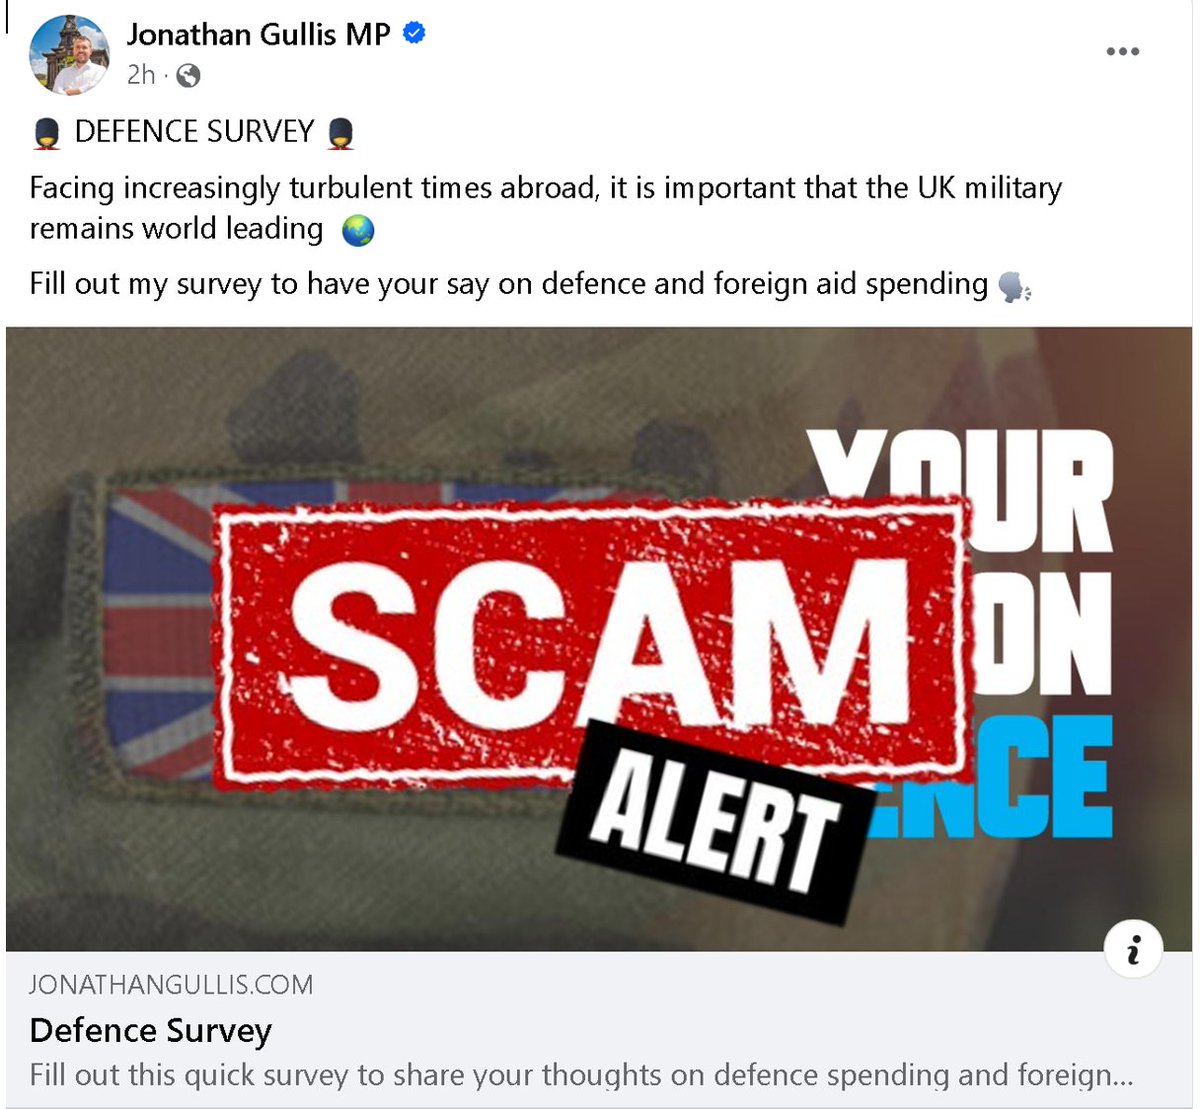 Another day another data harvesting scam.
#Gullis #GullisOut #ToriesOut640